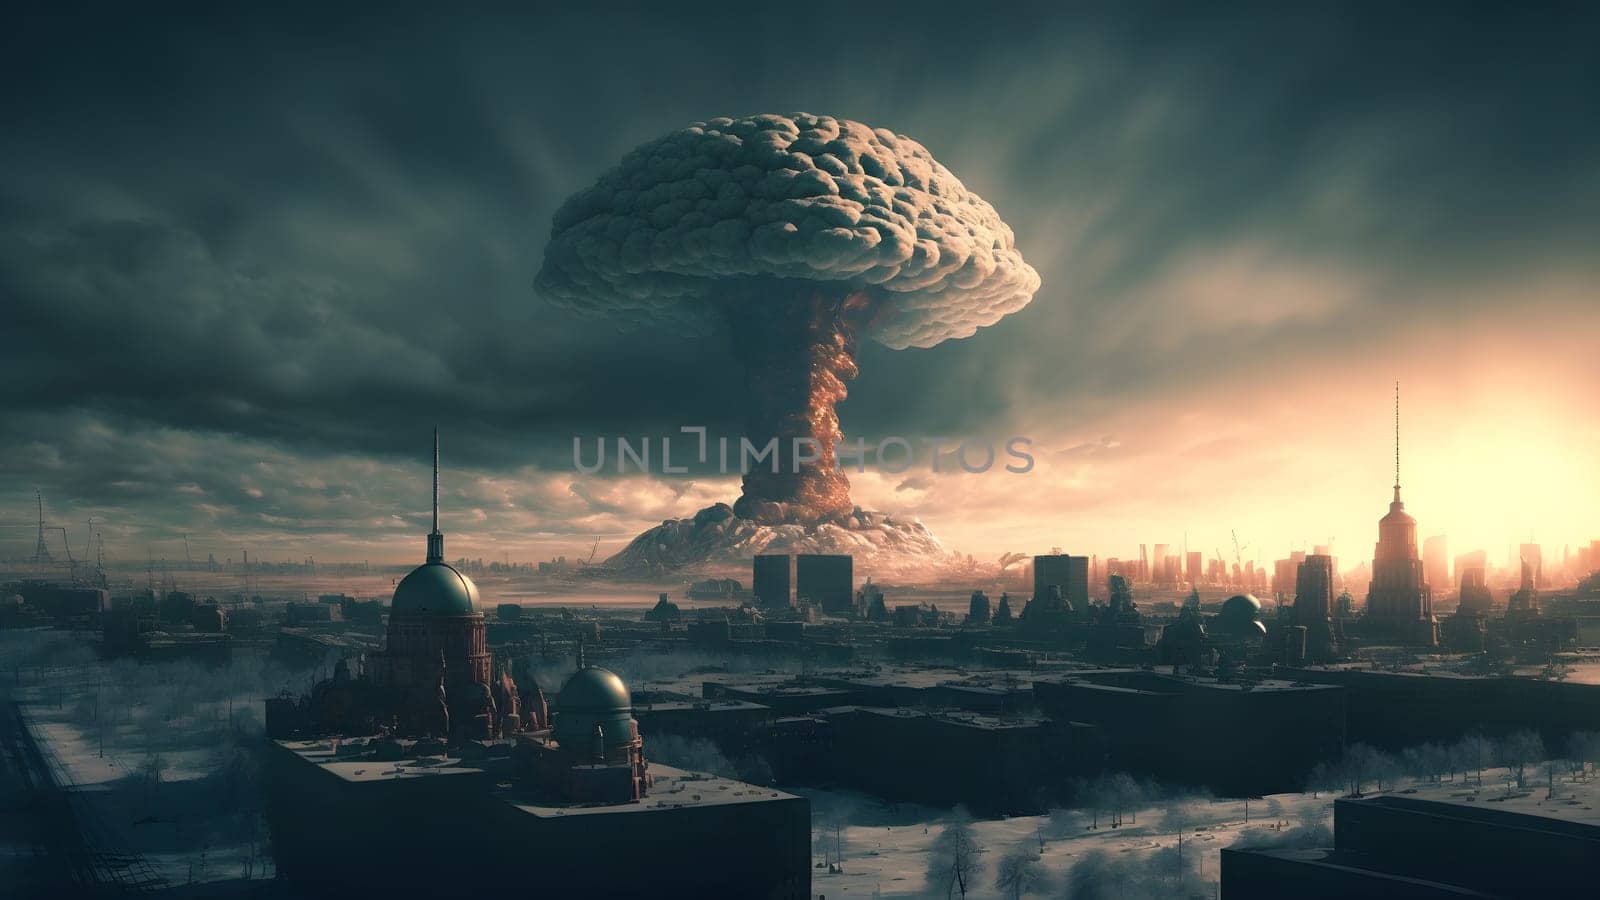 nuclear explosion mushroom cloud over russian city at winter morning, neural network generated art by z1b